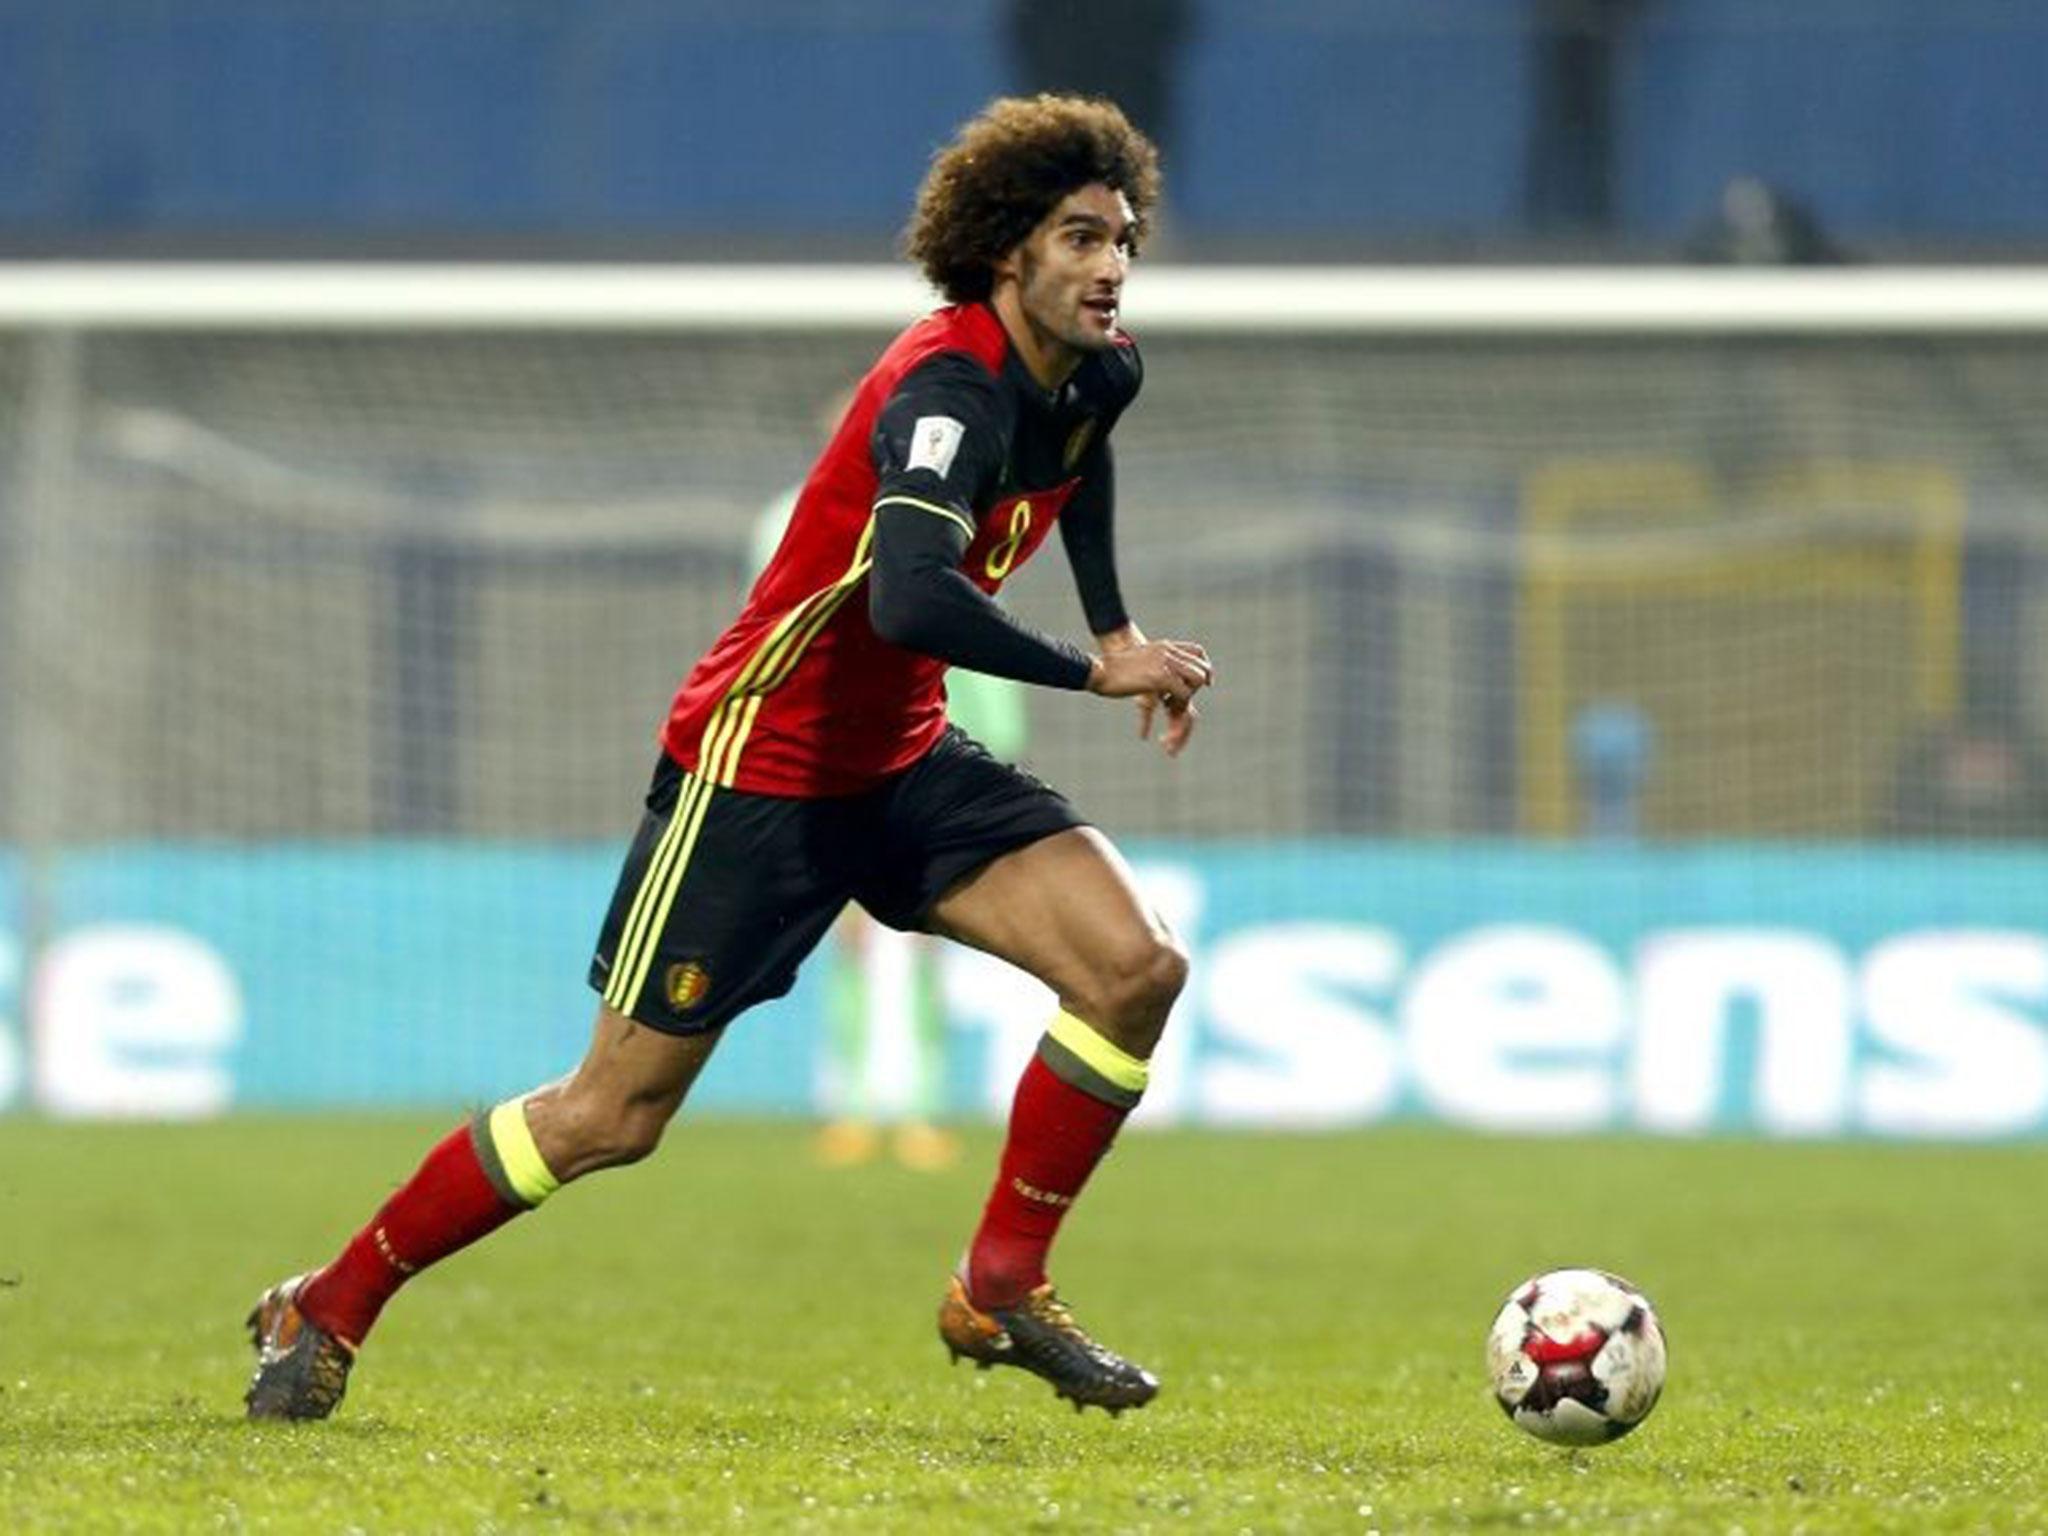 Marouane Fellaini will miss two weeks after being injured on international duty with Belgium